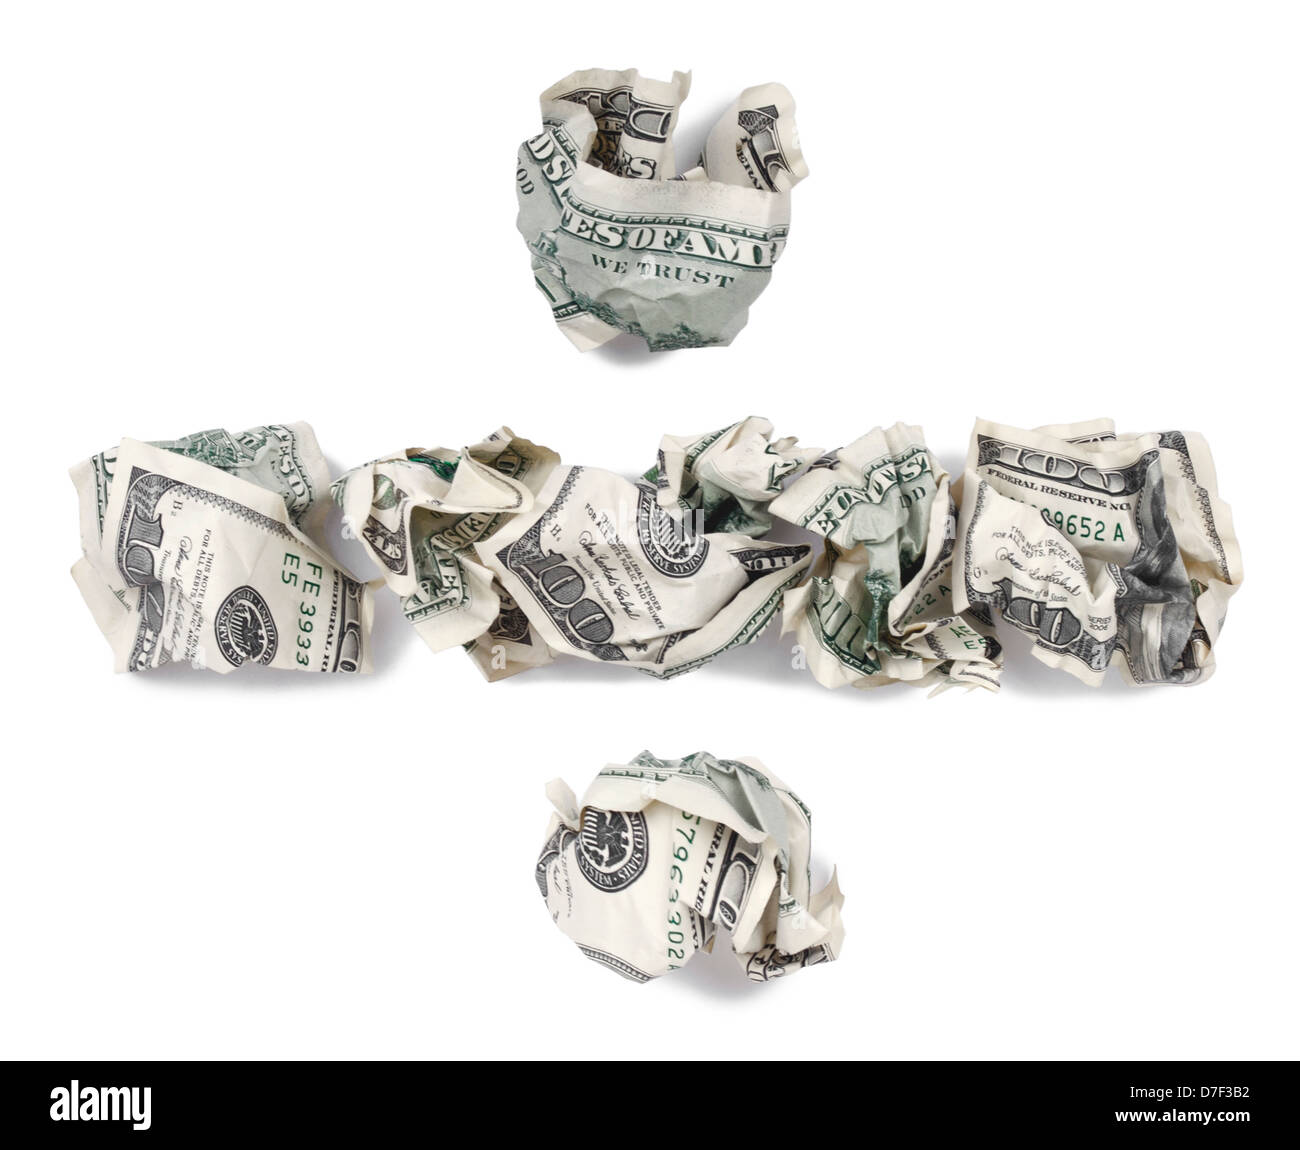 A division symbol made out of crimped 100$ bills. Isolated on white background. Stock Photo